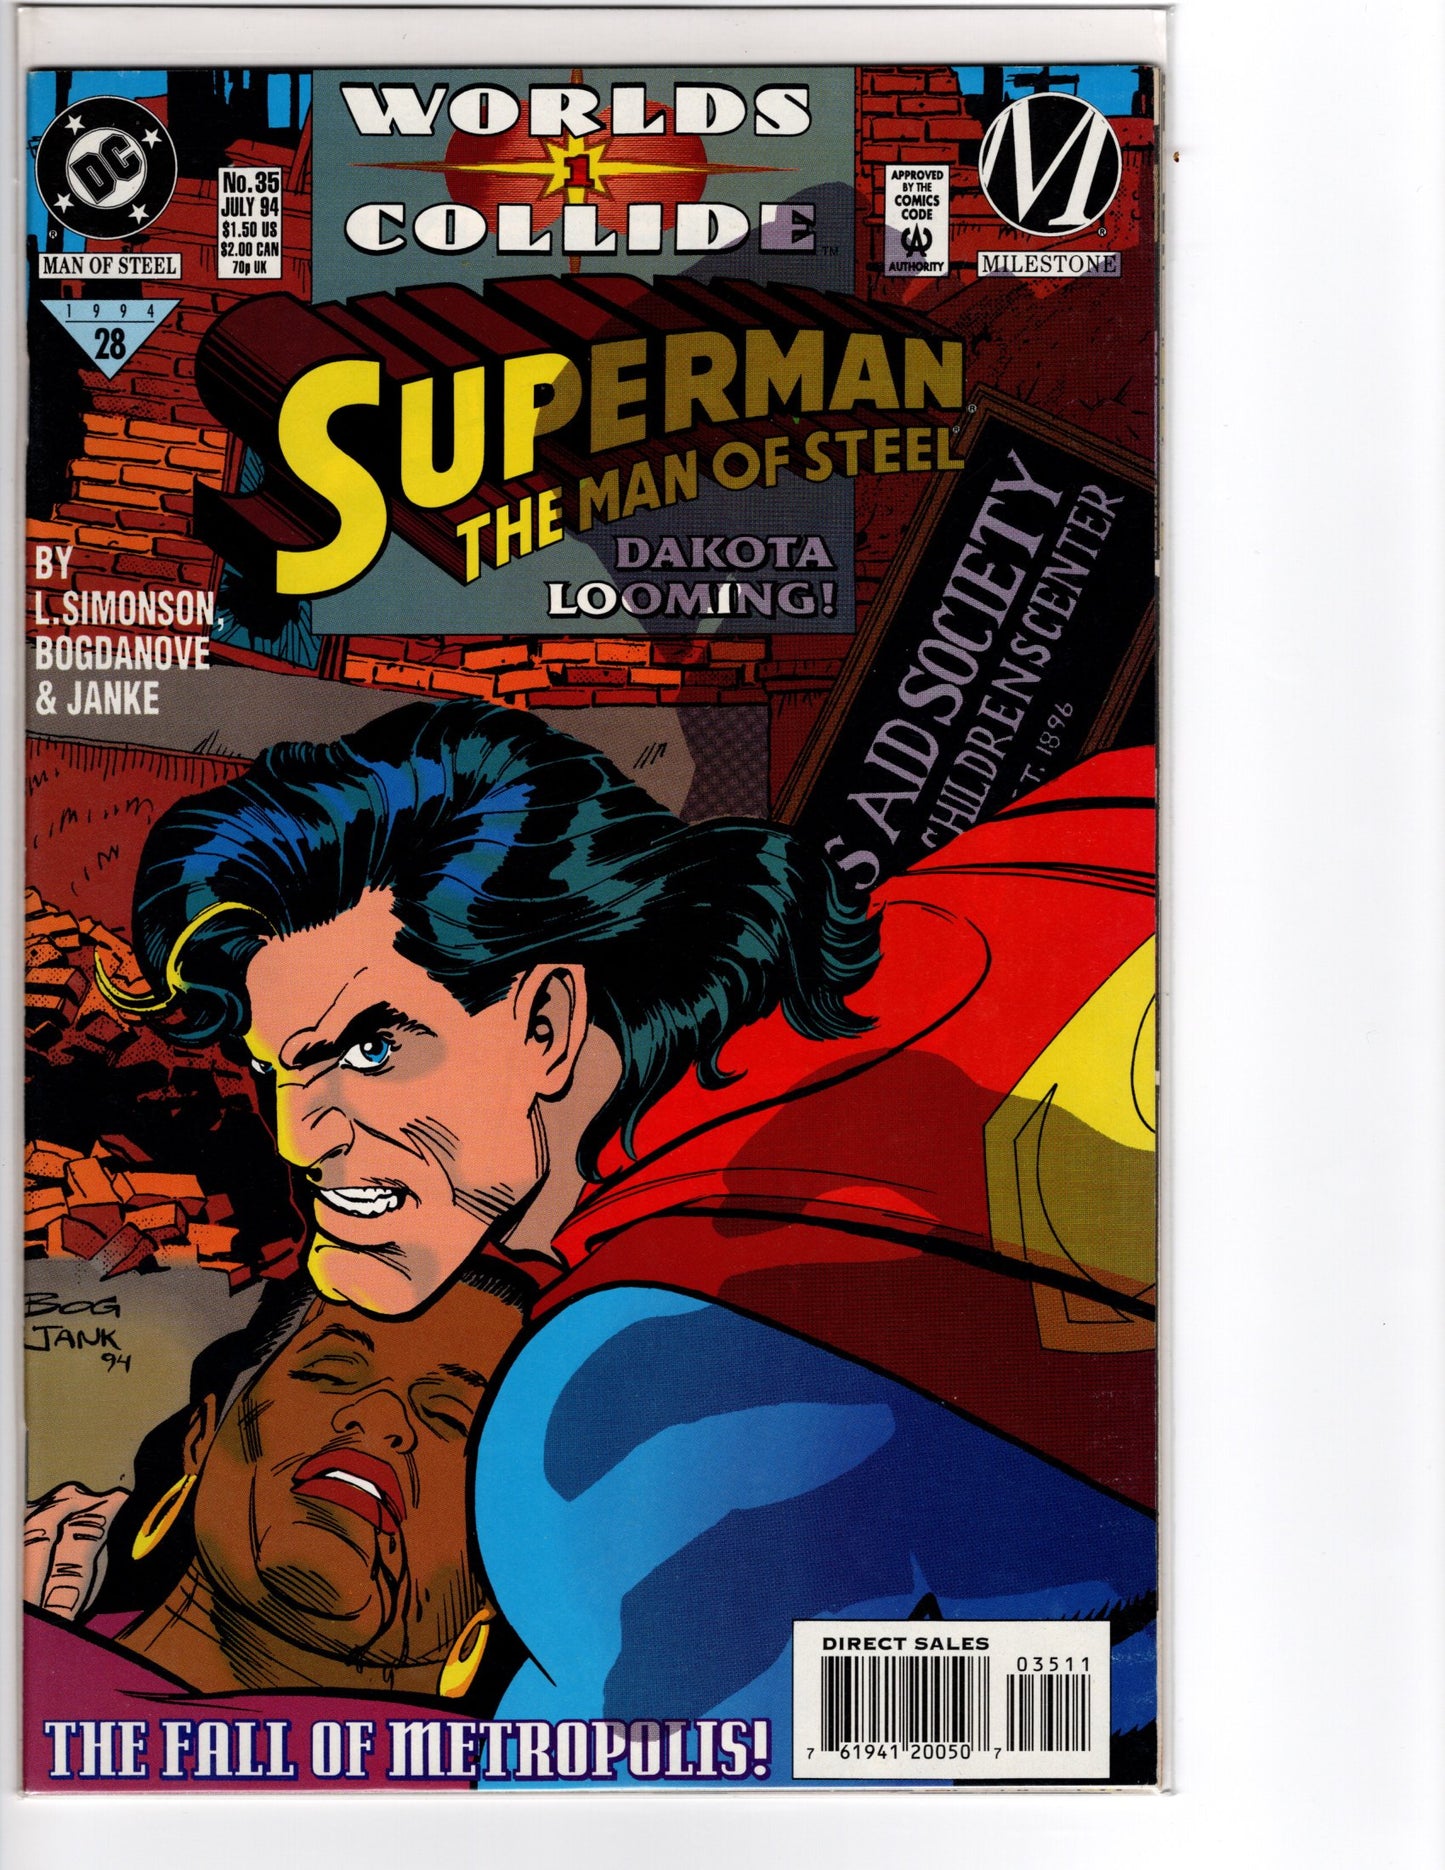 Superman - The Man of Steel No. 35